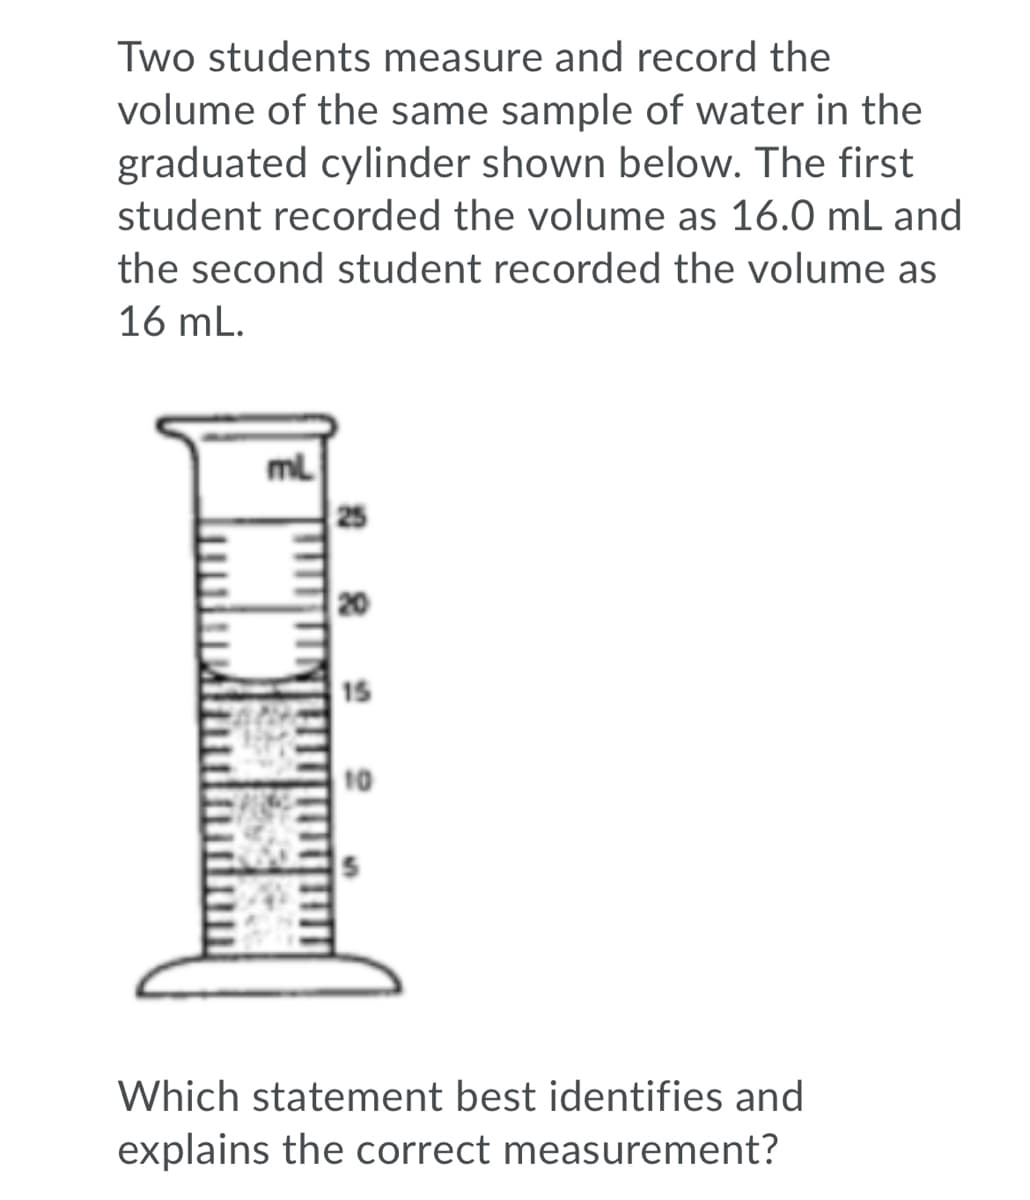 Two students measure and record the
volume of the same sample of water in the
graduated cylinder shown below. The first
student recorded the volume as 16.0 mL and
the second student recorded the volume as
16 mL.
ml
20
15
10
Which statement best identifies and
explains the correct measurement?
